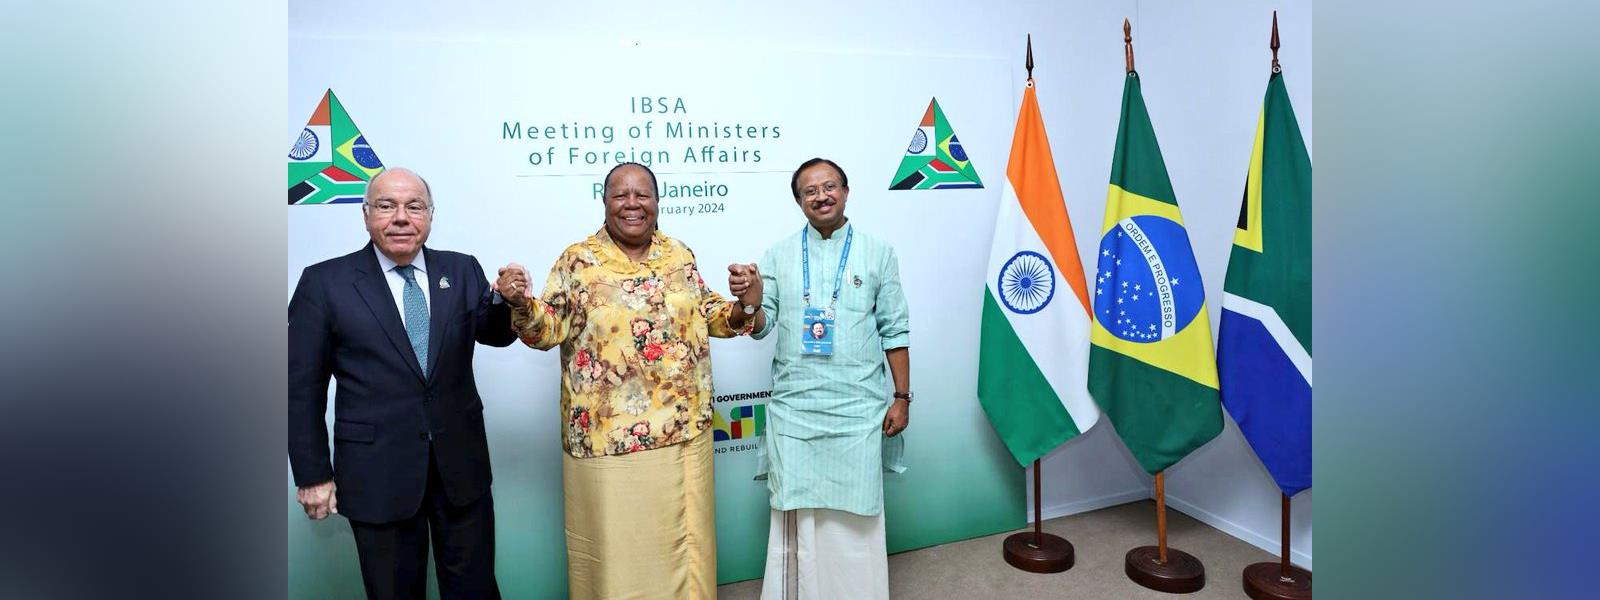 Minister of State for External Affairs Shri V. Muraleedharan represented India at IBSA Foreign Ministers' Meeting in Rio de Janeiro